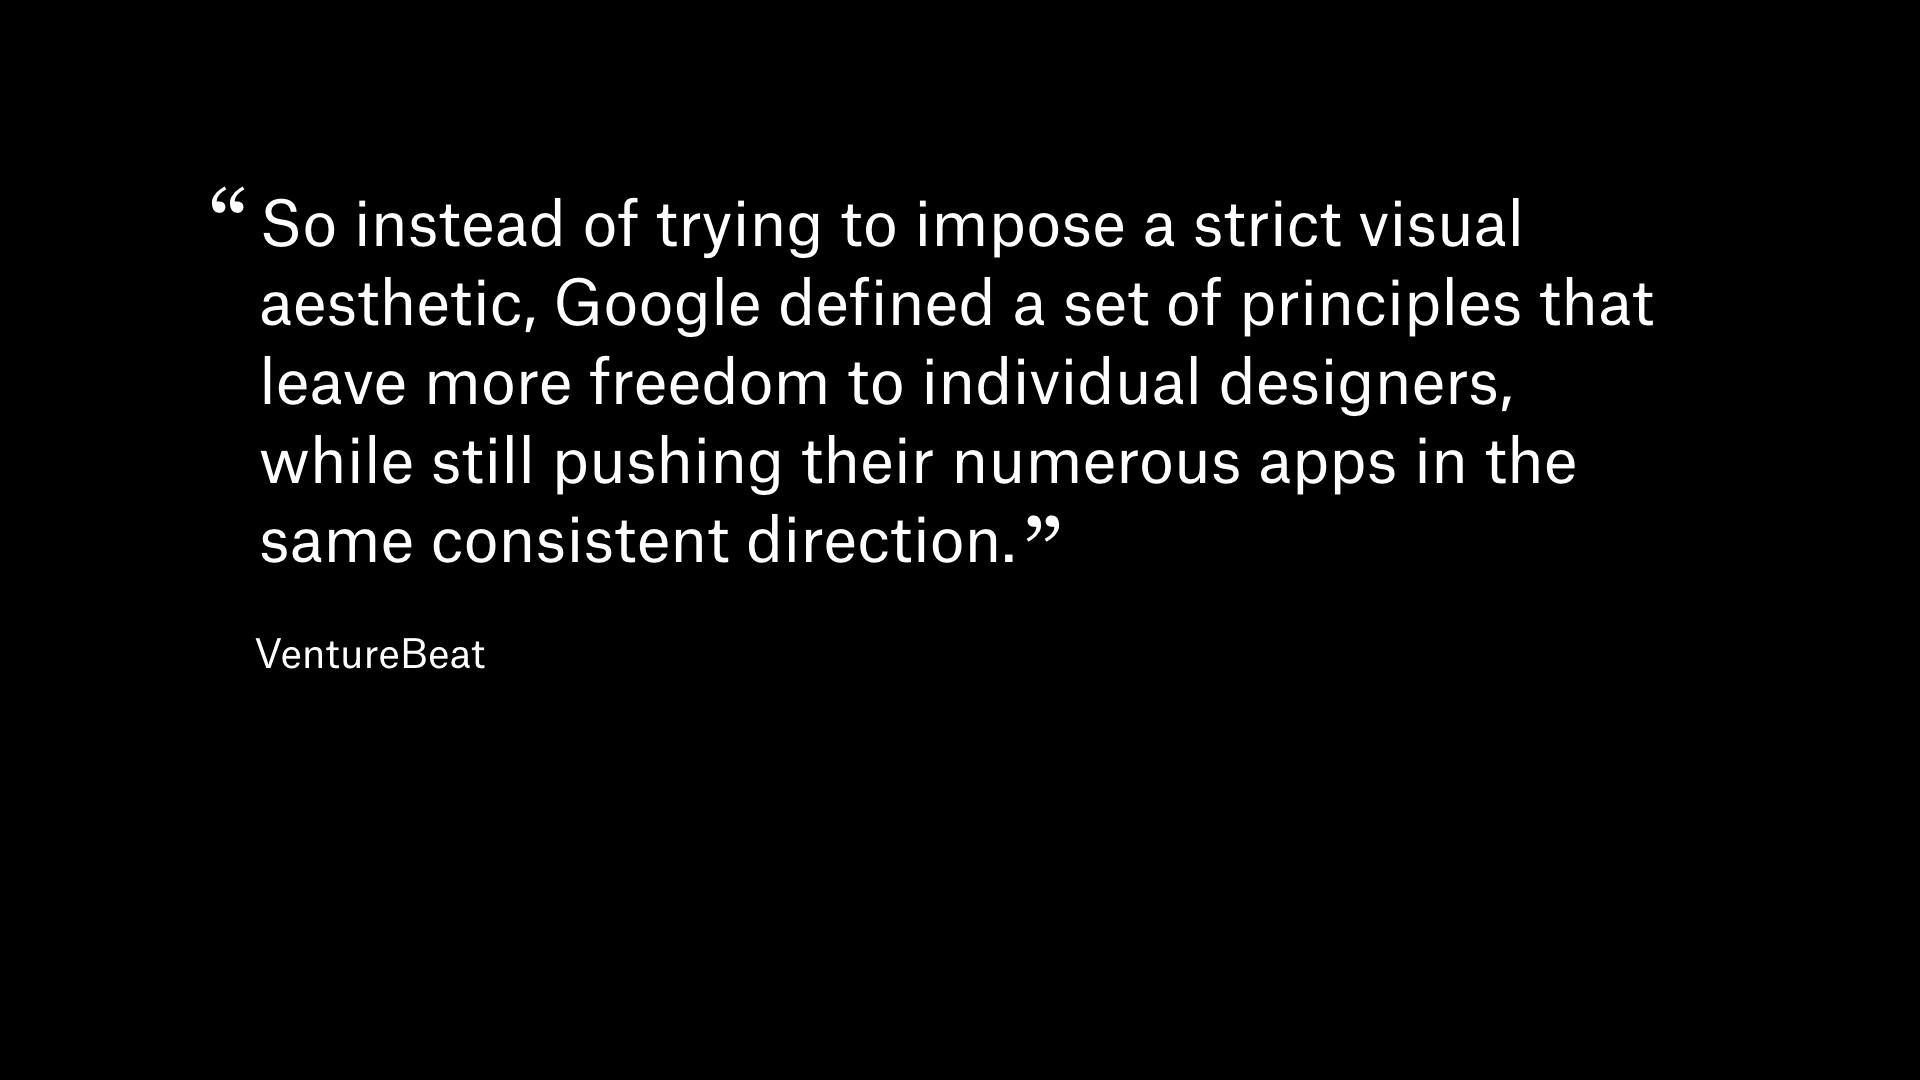 Quote from VentureBeate: So instead of trying to impose a strict visual aesthetic, Google defined a set of principles that leave more freedom to individual designers, while still pushing their numerous apps in the same consistent direction.